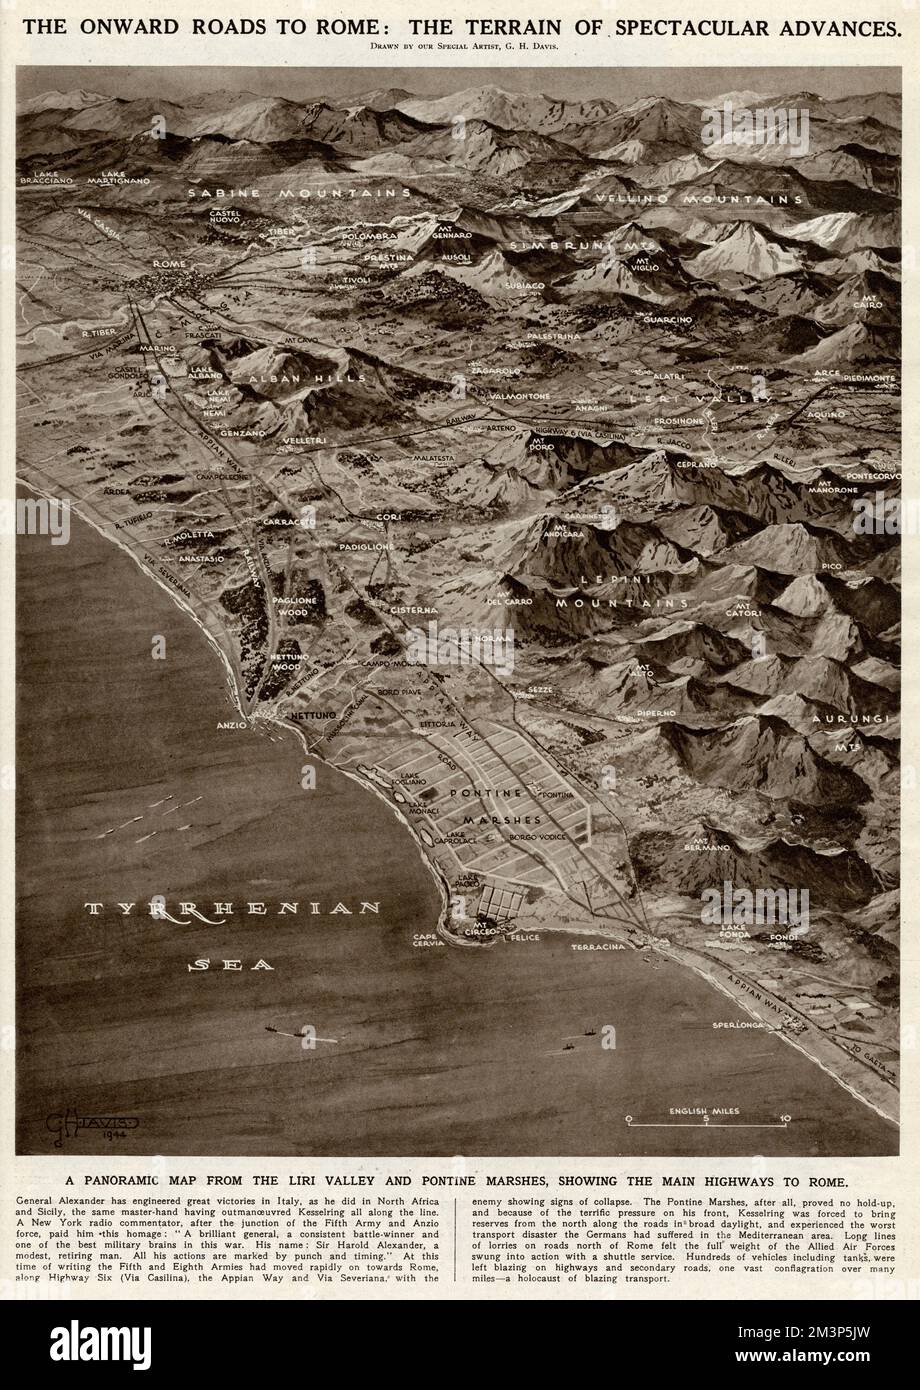 The onward roads to Rome: the terrain of spectacular advances during the Second World War.  A panoramic map from the Liri Valley and Pontine Marshes, showing the main highways to Rome. Stock Photo